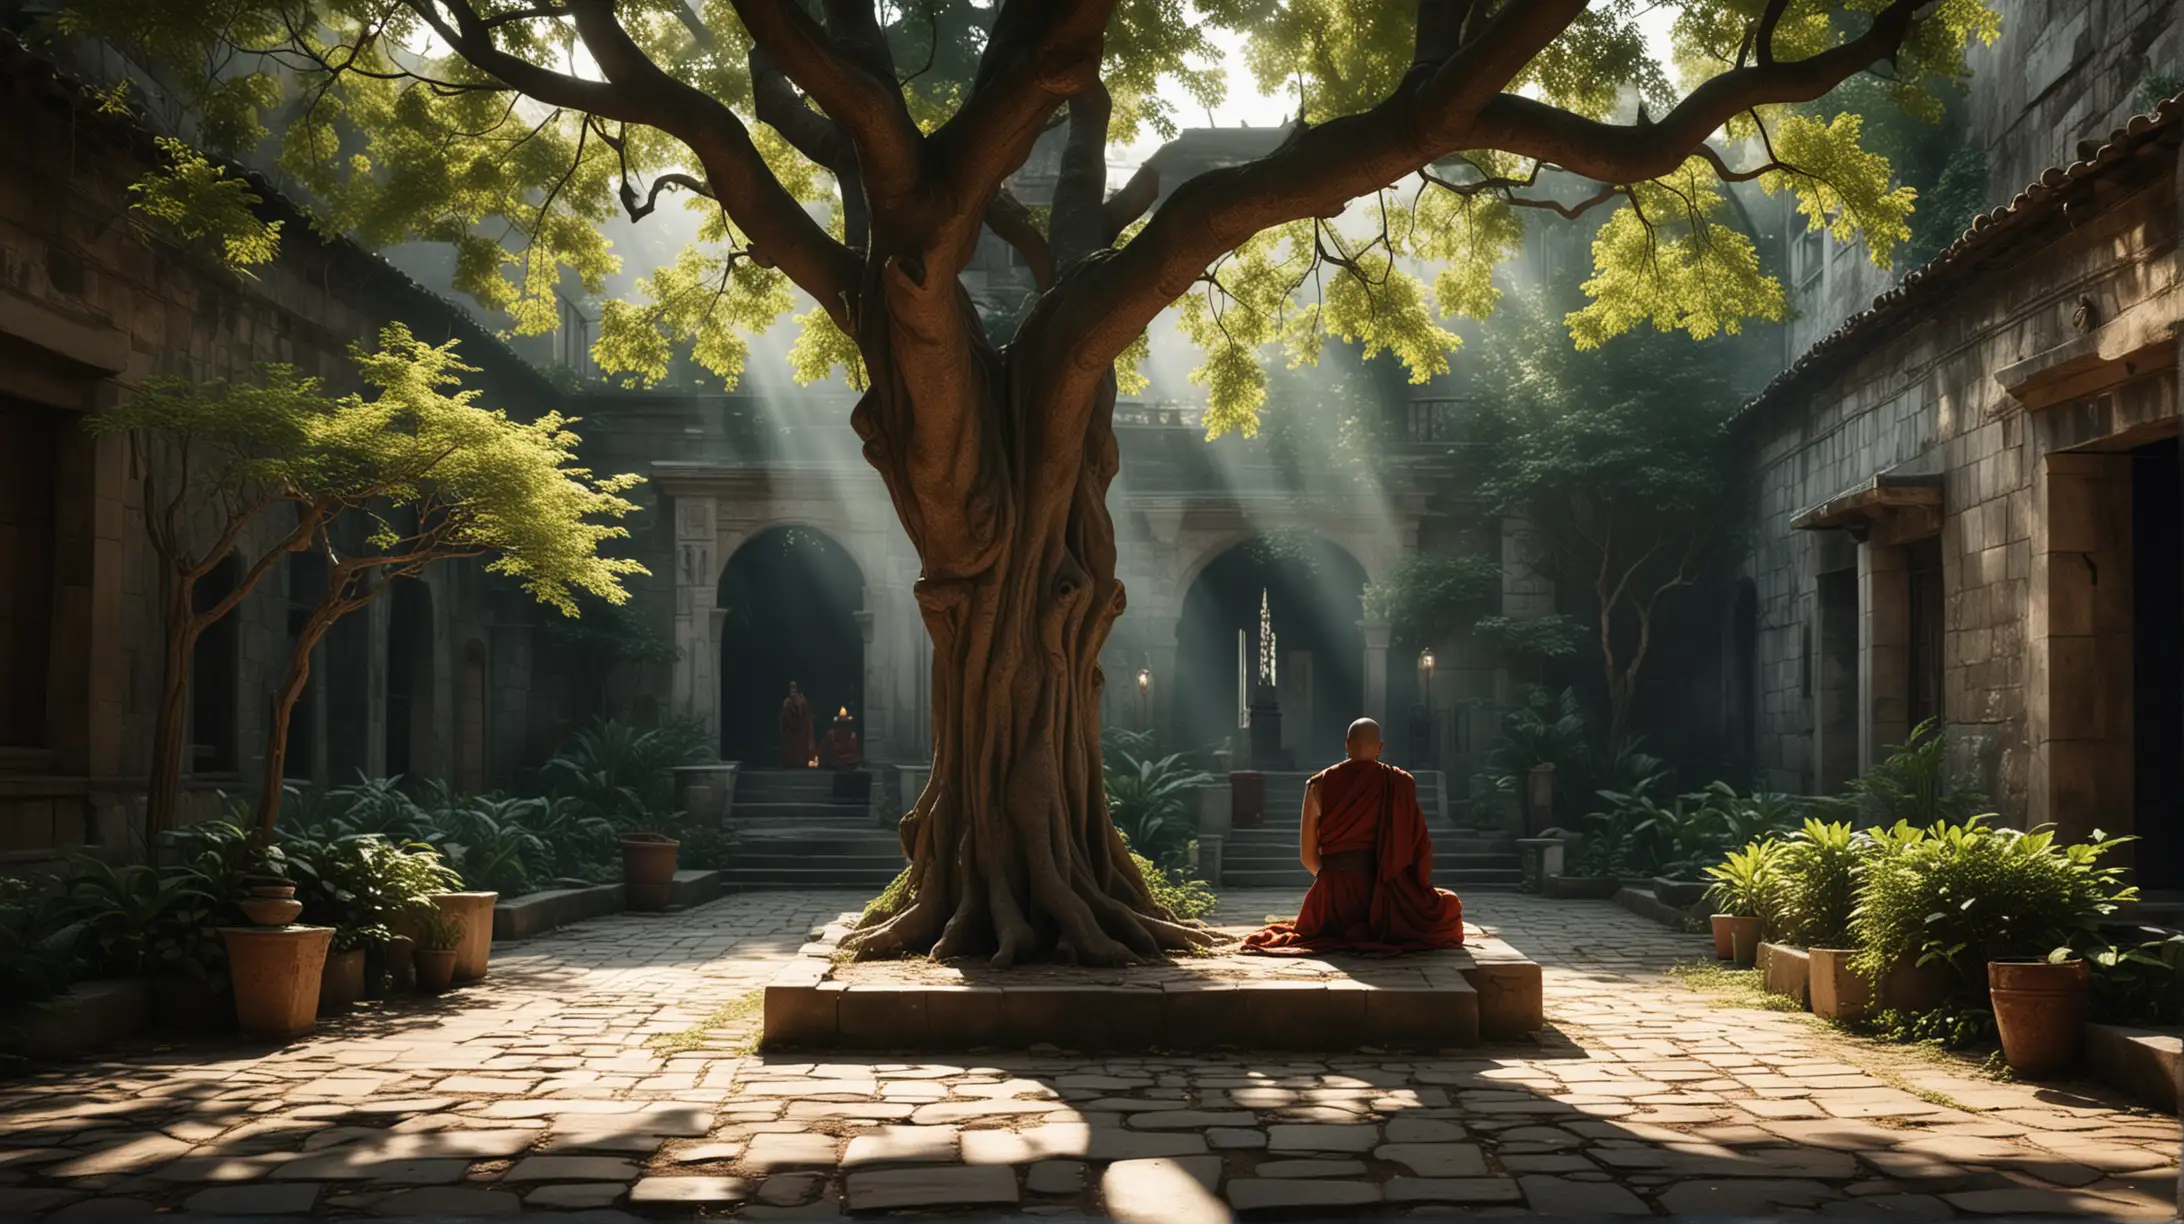 Imagine a serene monastery courtyard with ancient stone buildings and lush greenery. In the center, a large, majestic tree provides shade, under which the wise monk and his devoted follower sit on cushions. The sunlight filters through the leaves, casting dappled shadows on the ground. Their faces reflect deep concentration and reverence as they engage in a meaningful conversation about compassion and understanding.Create Spirited , mildly dark and mildly colourful, atmospheric images inspired by noir video games. Use with Vision XL for best results.